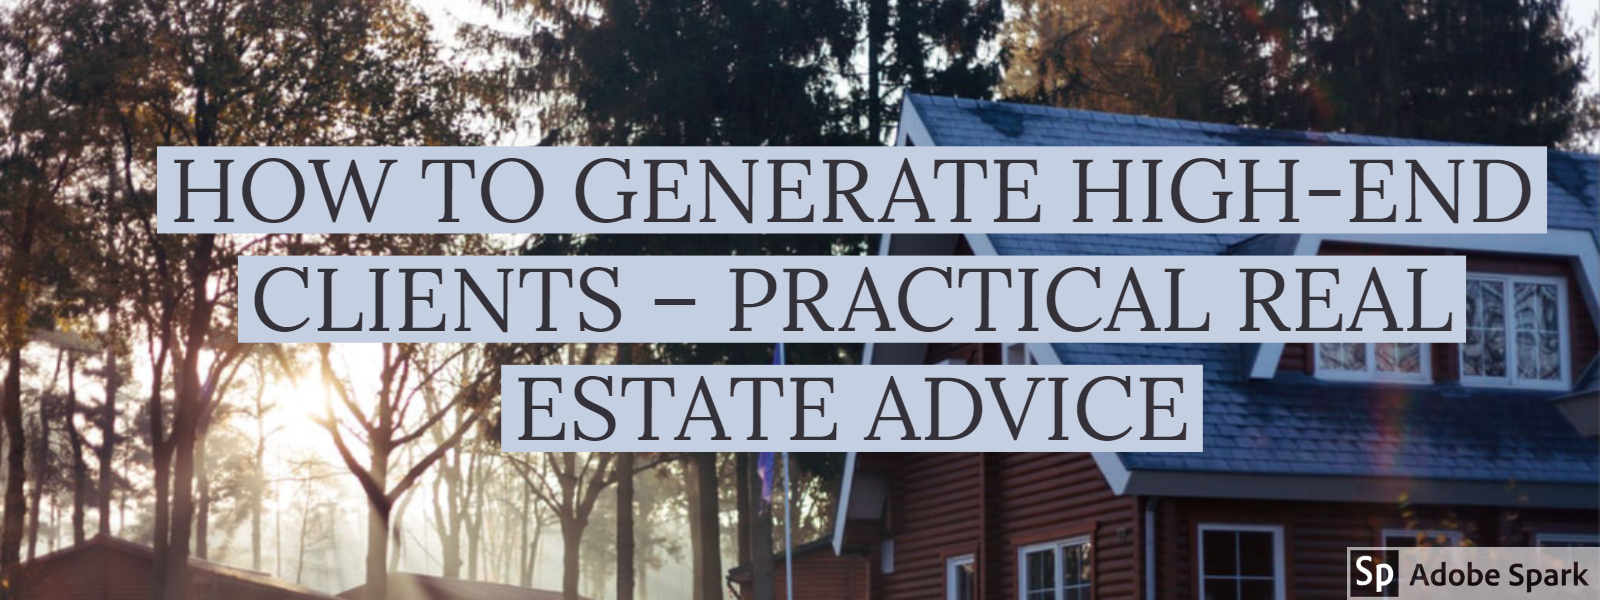 HOW TO GENERATE HIGH-END CLIENTS – PRACTICAL REAL ESTATE ADVICE